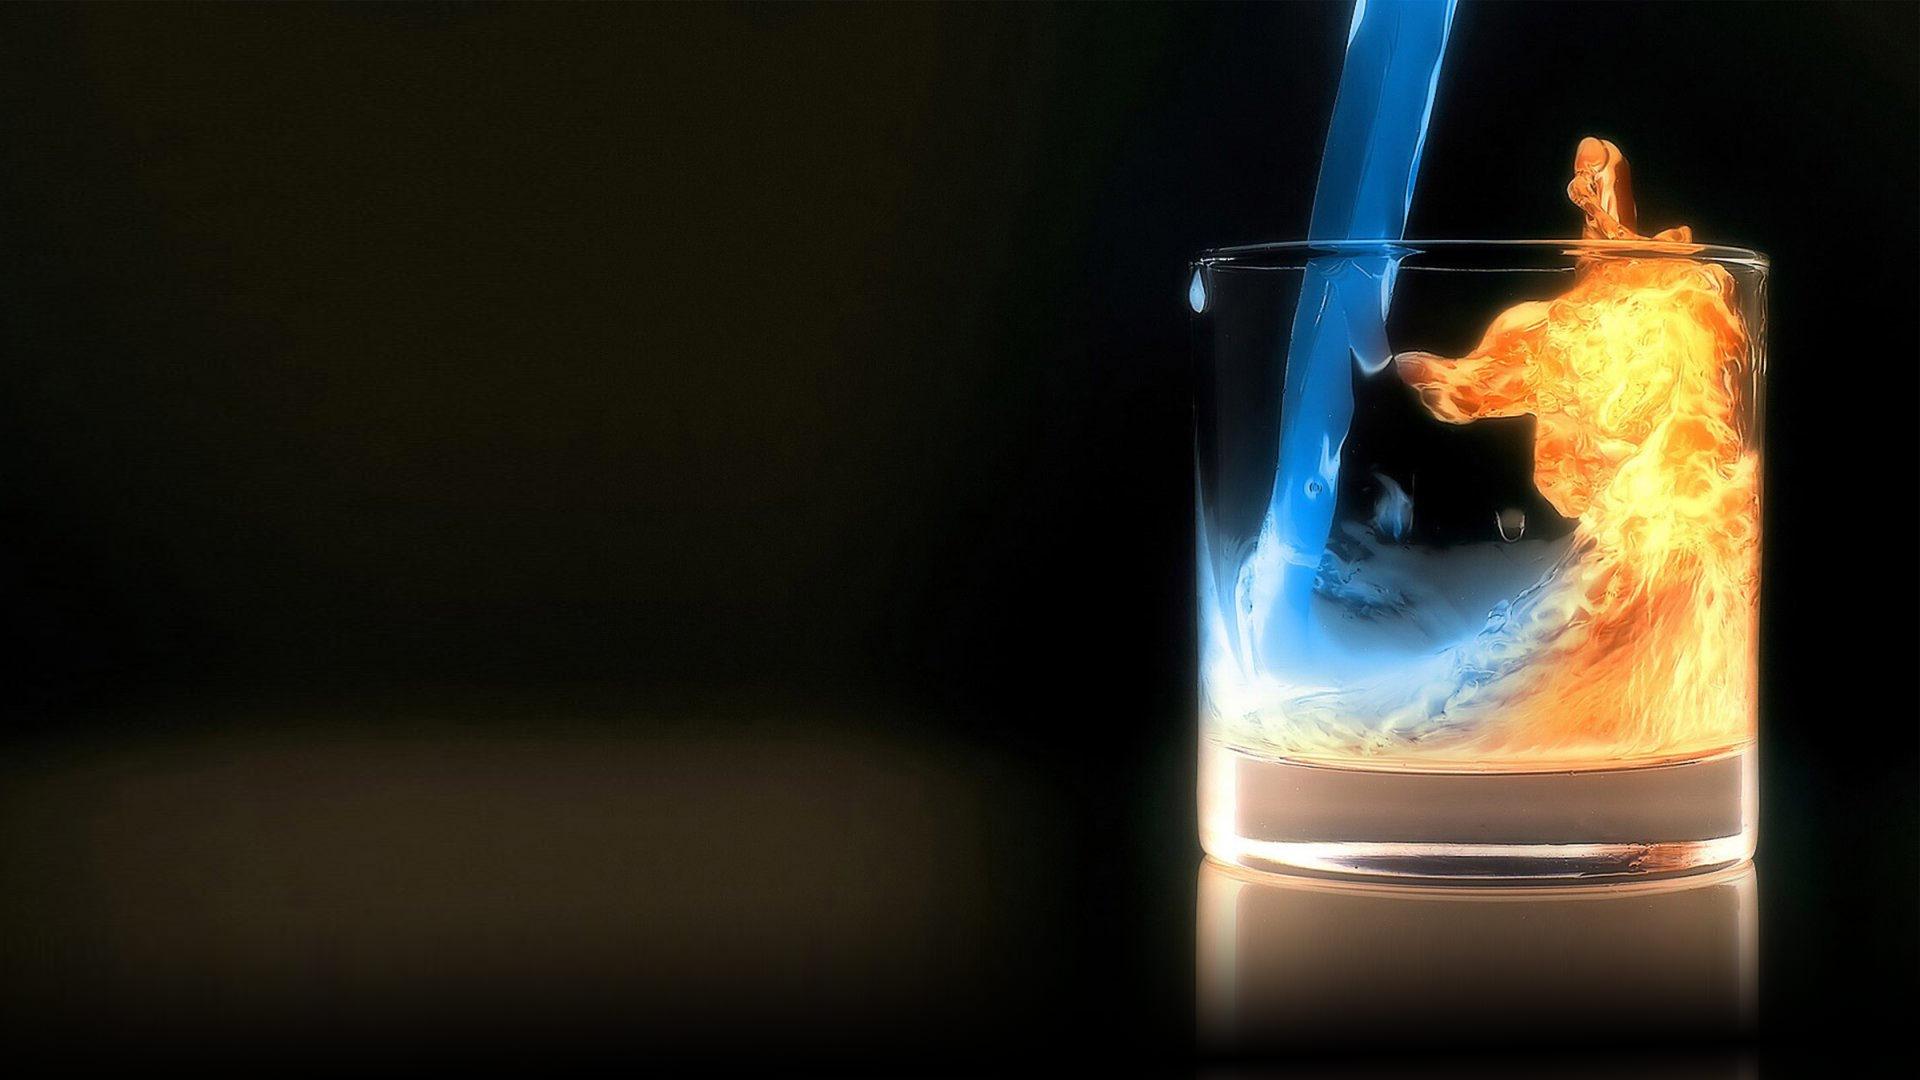 Fire and water in glass HD wallpaper. HD Latest Wallpaper